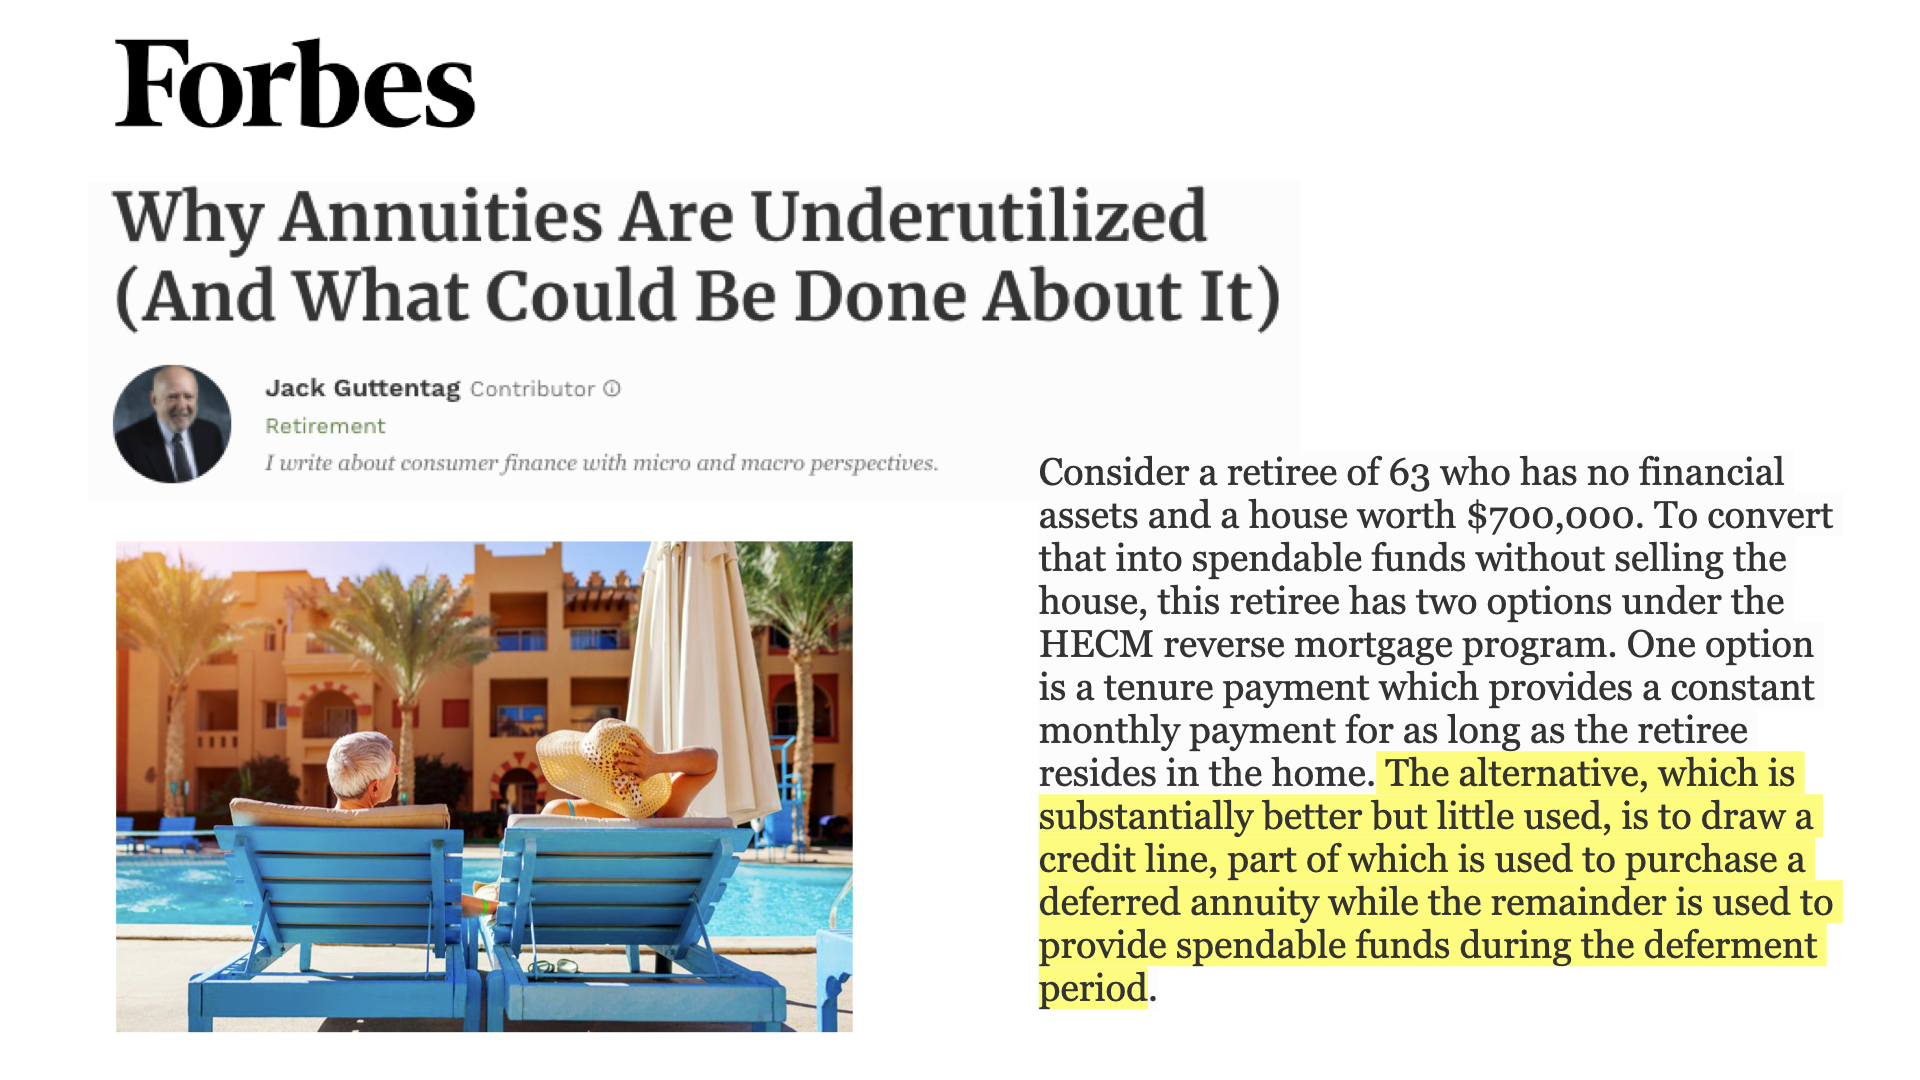 Jack Guttentag's recent column in Forbes addresses the taboo subject of combining annuities with a reverse mortgage